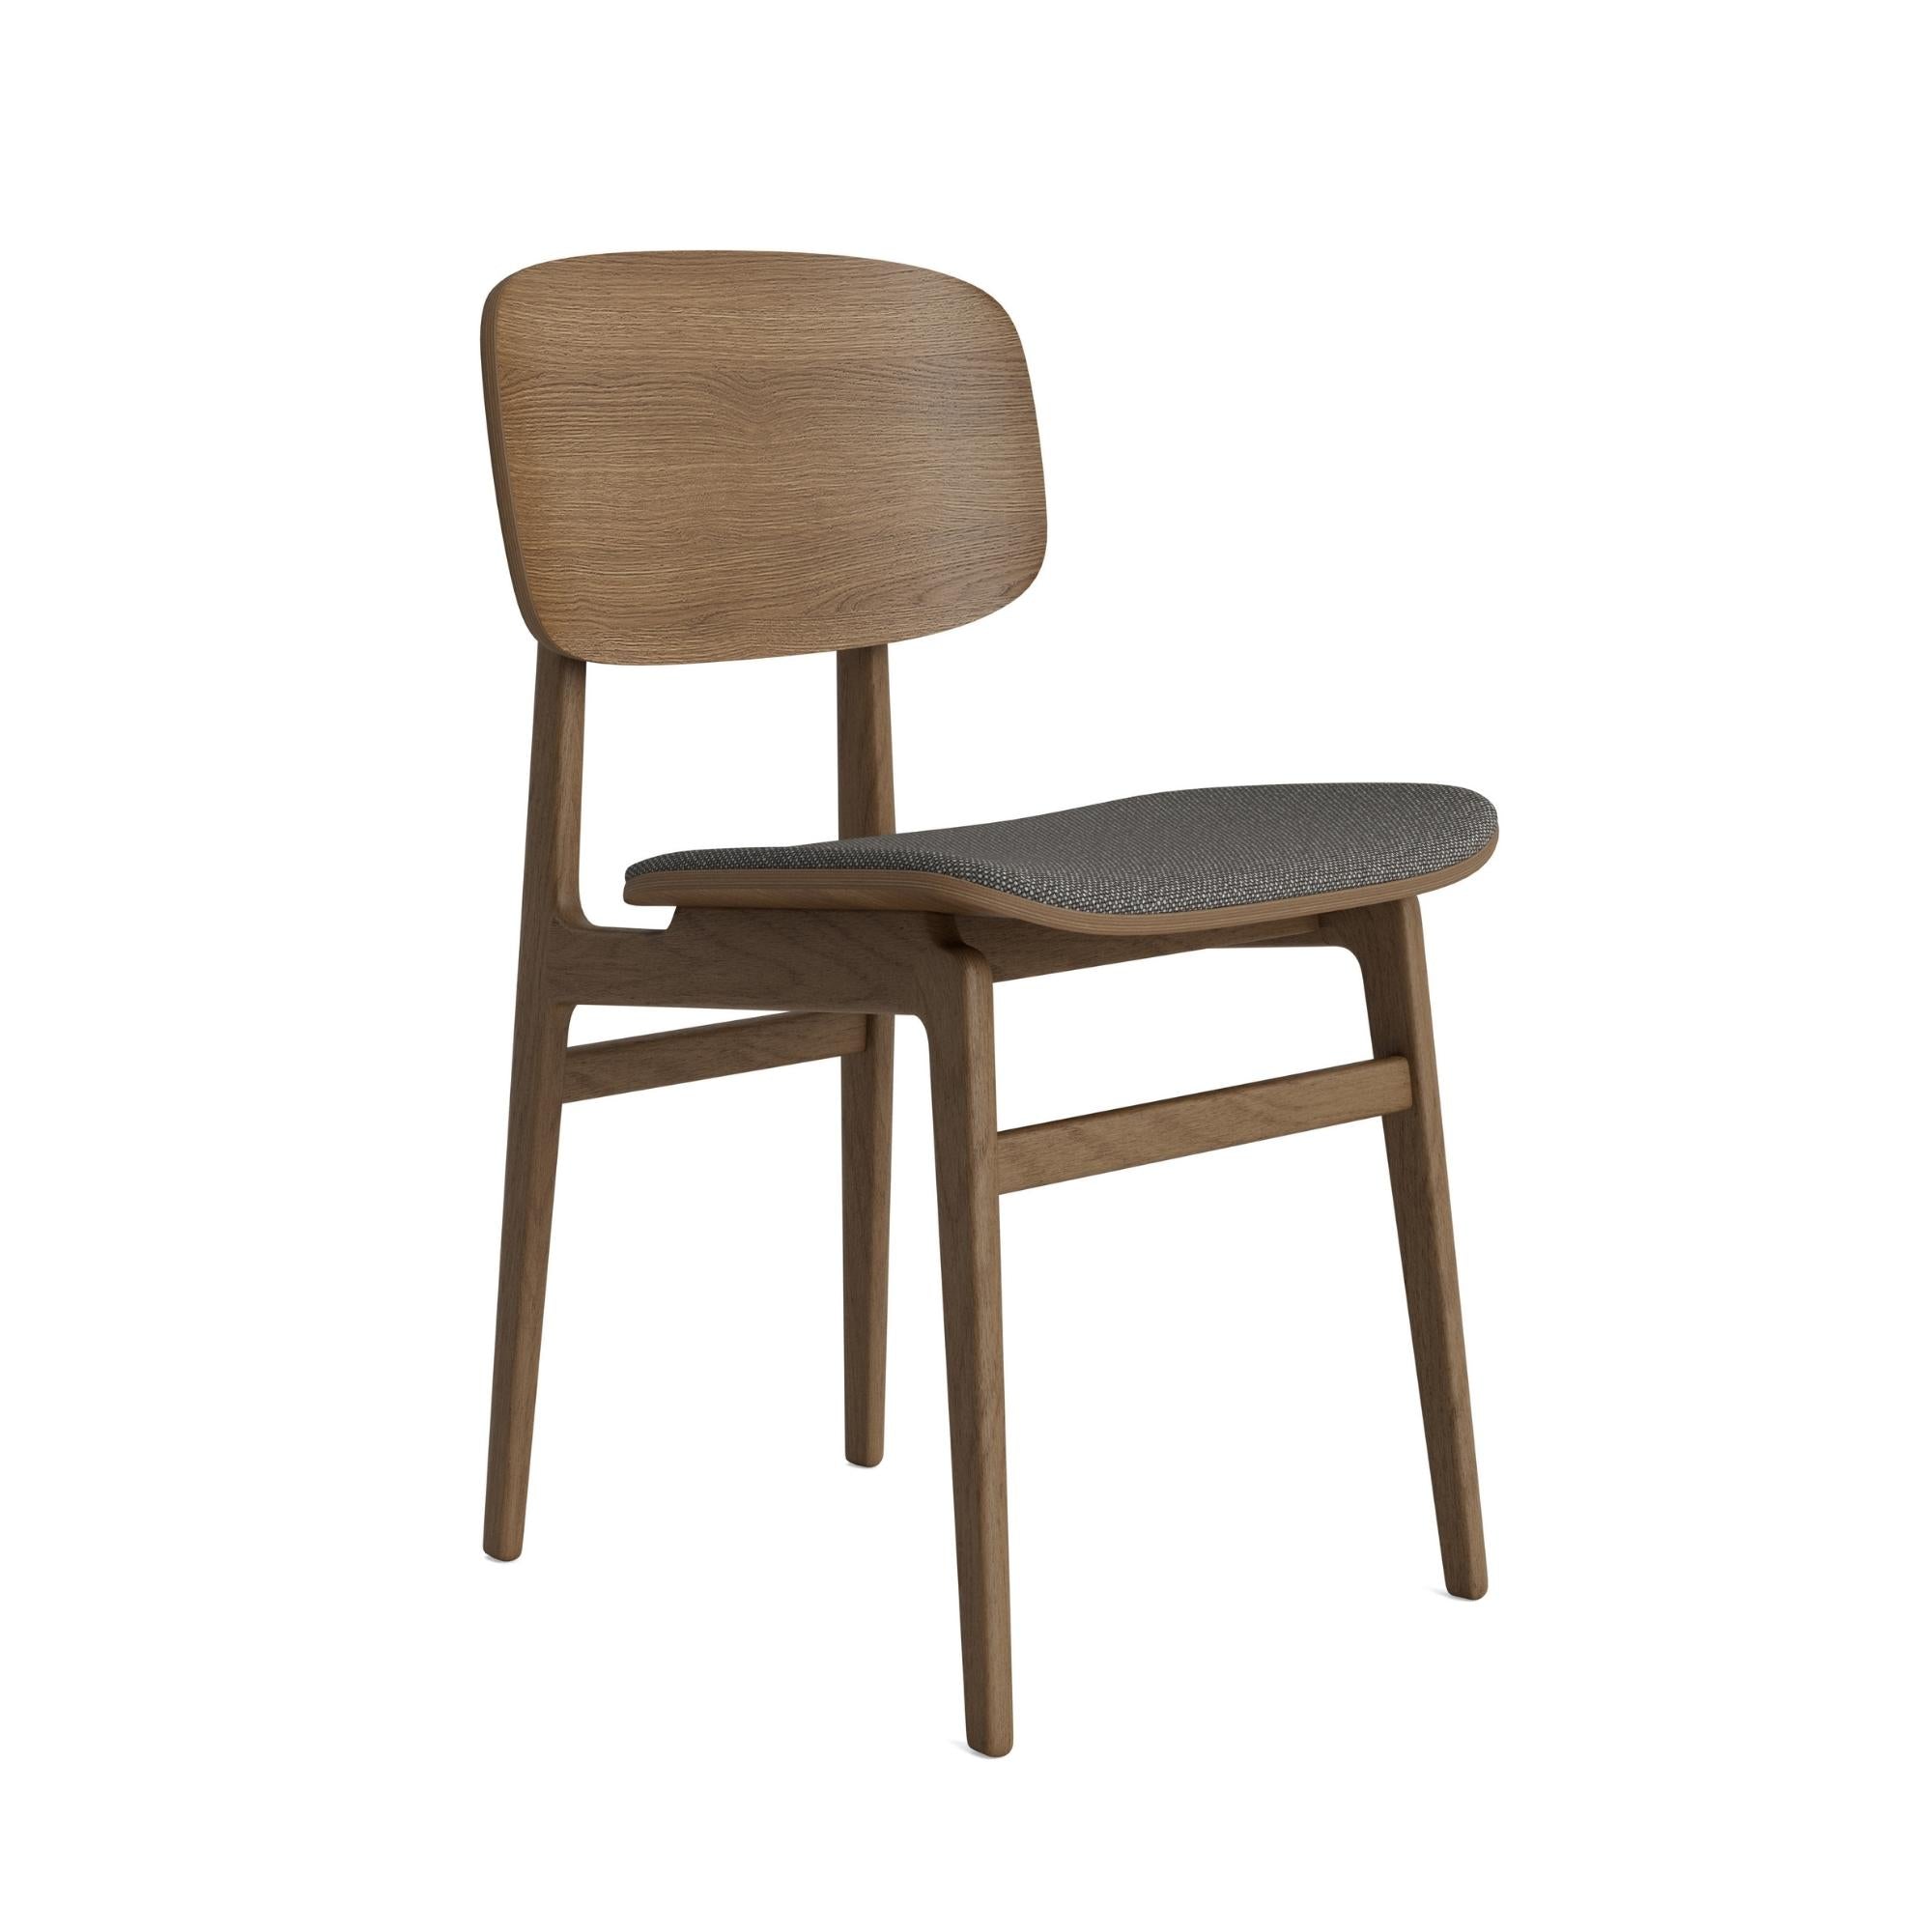 NY11 Chair - Kvadrat Chair NORR11